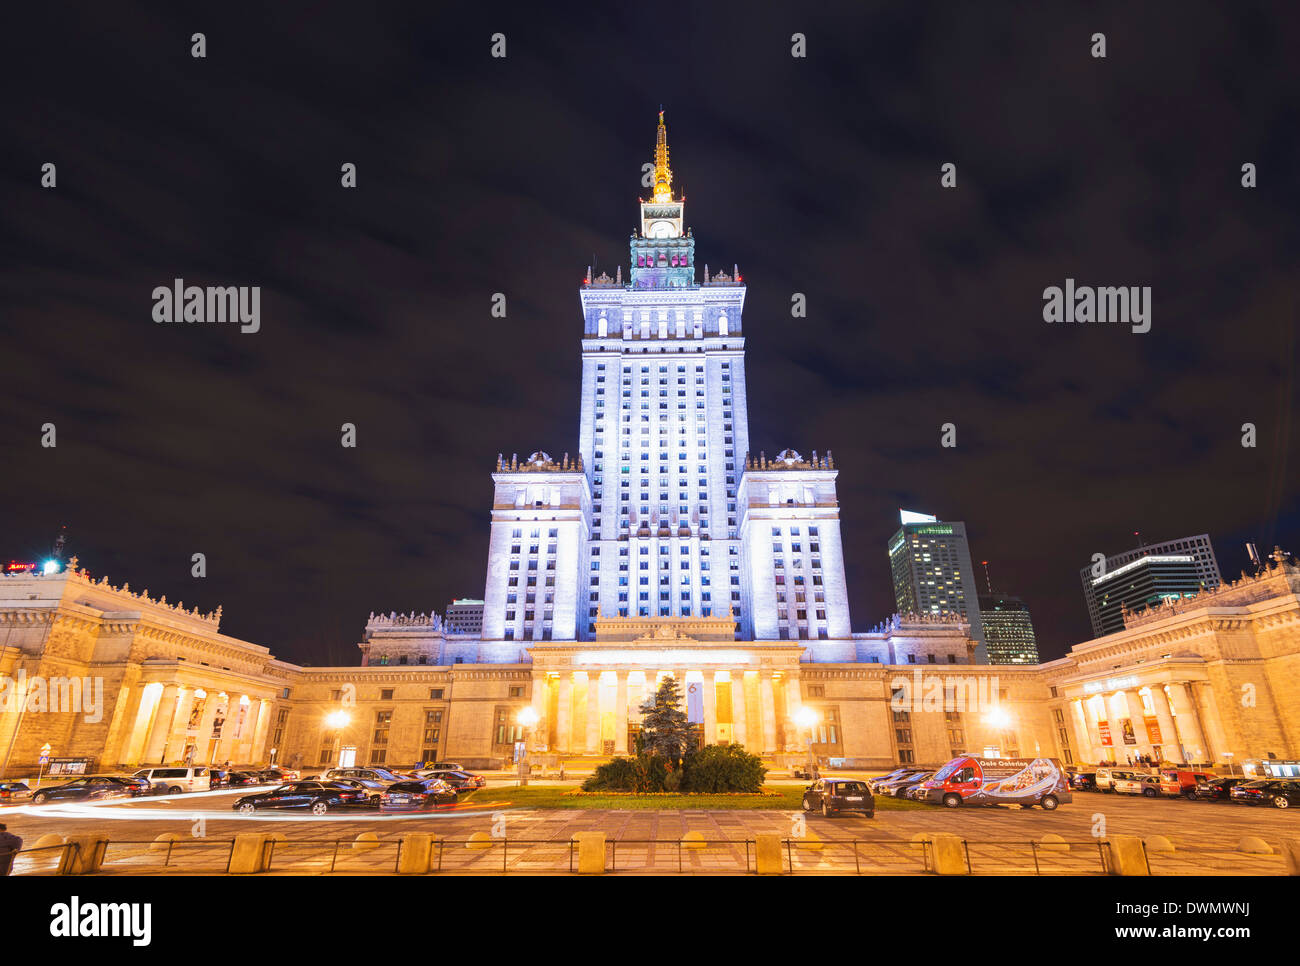 Palace of Culture and Science at night, Warsaw, Poland, Europe Stock Photo